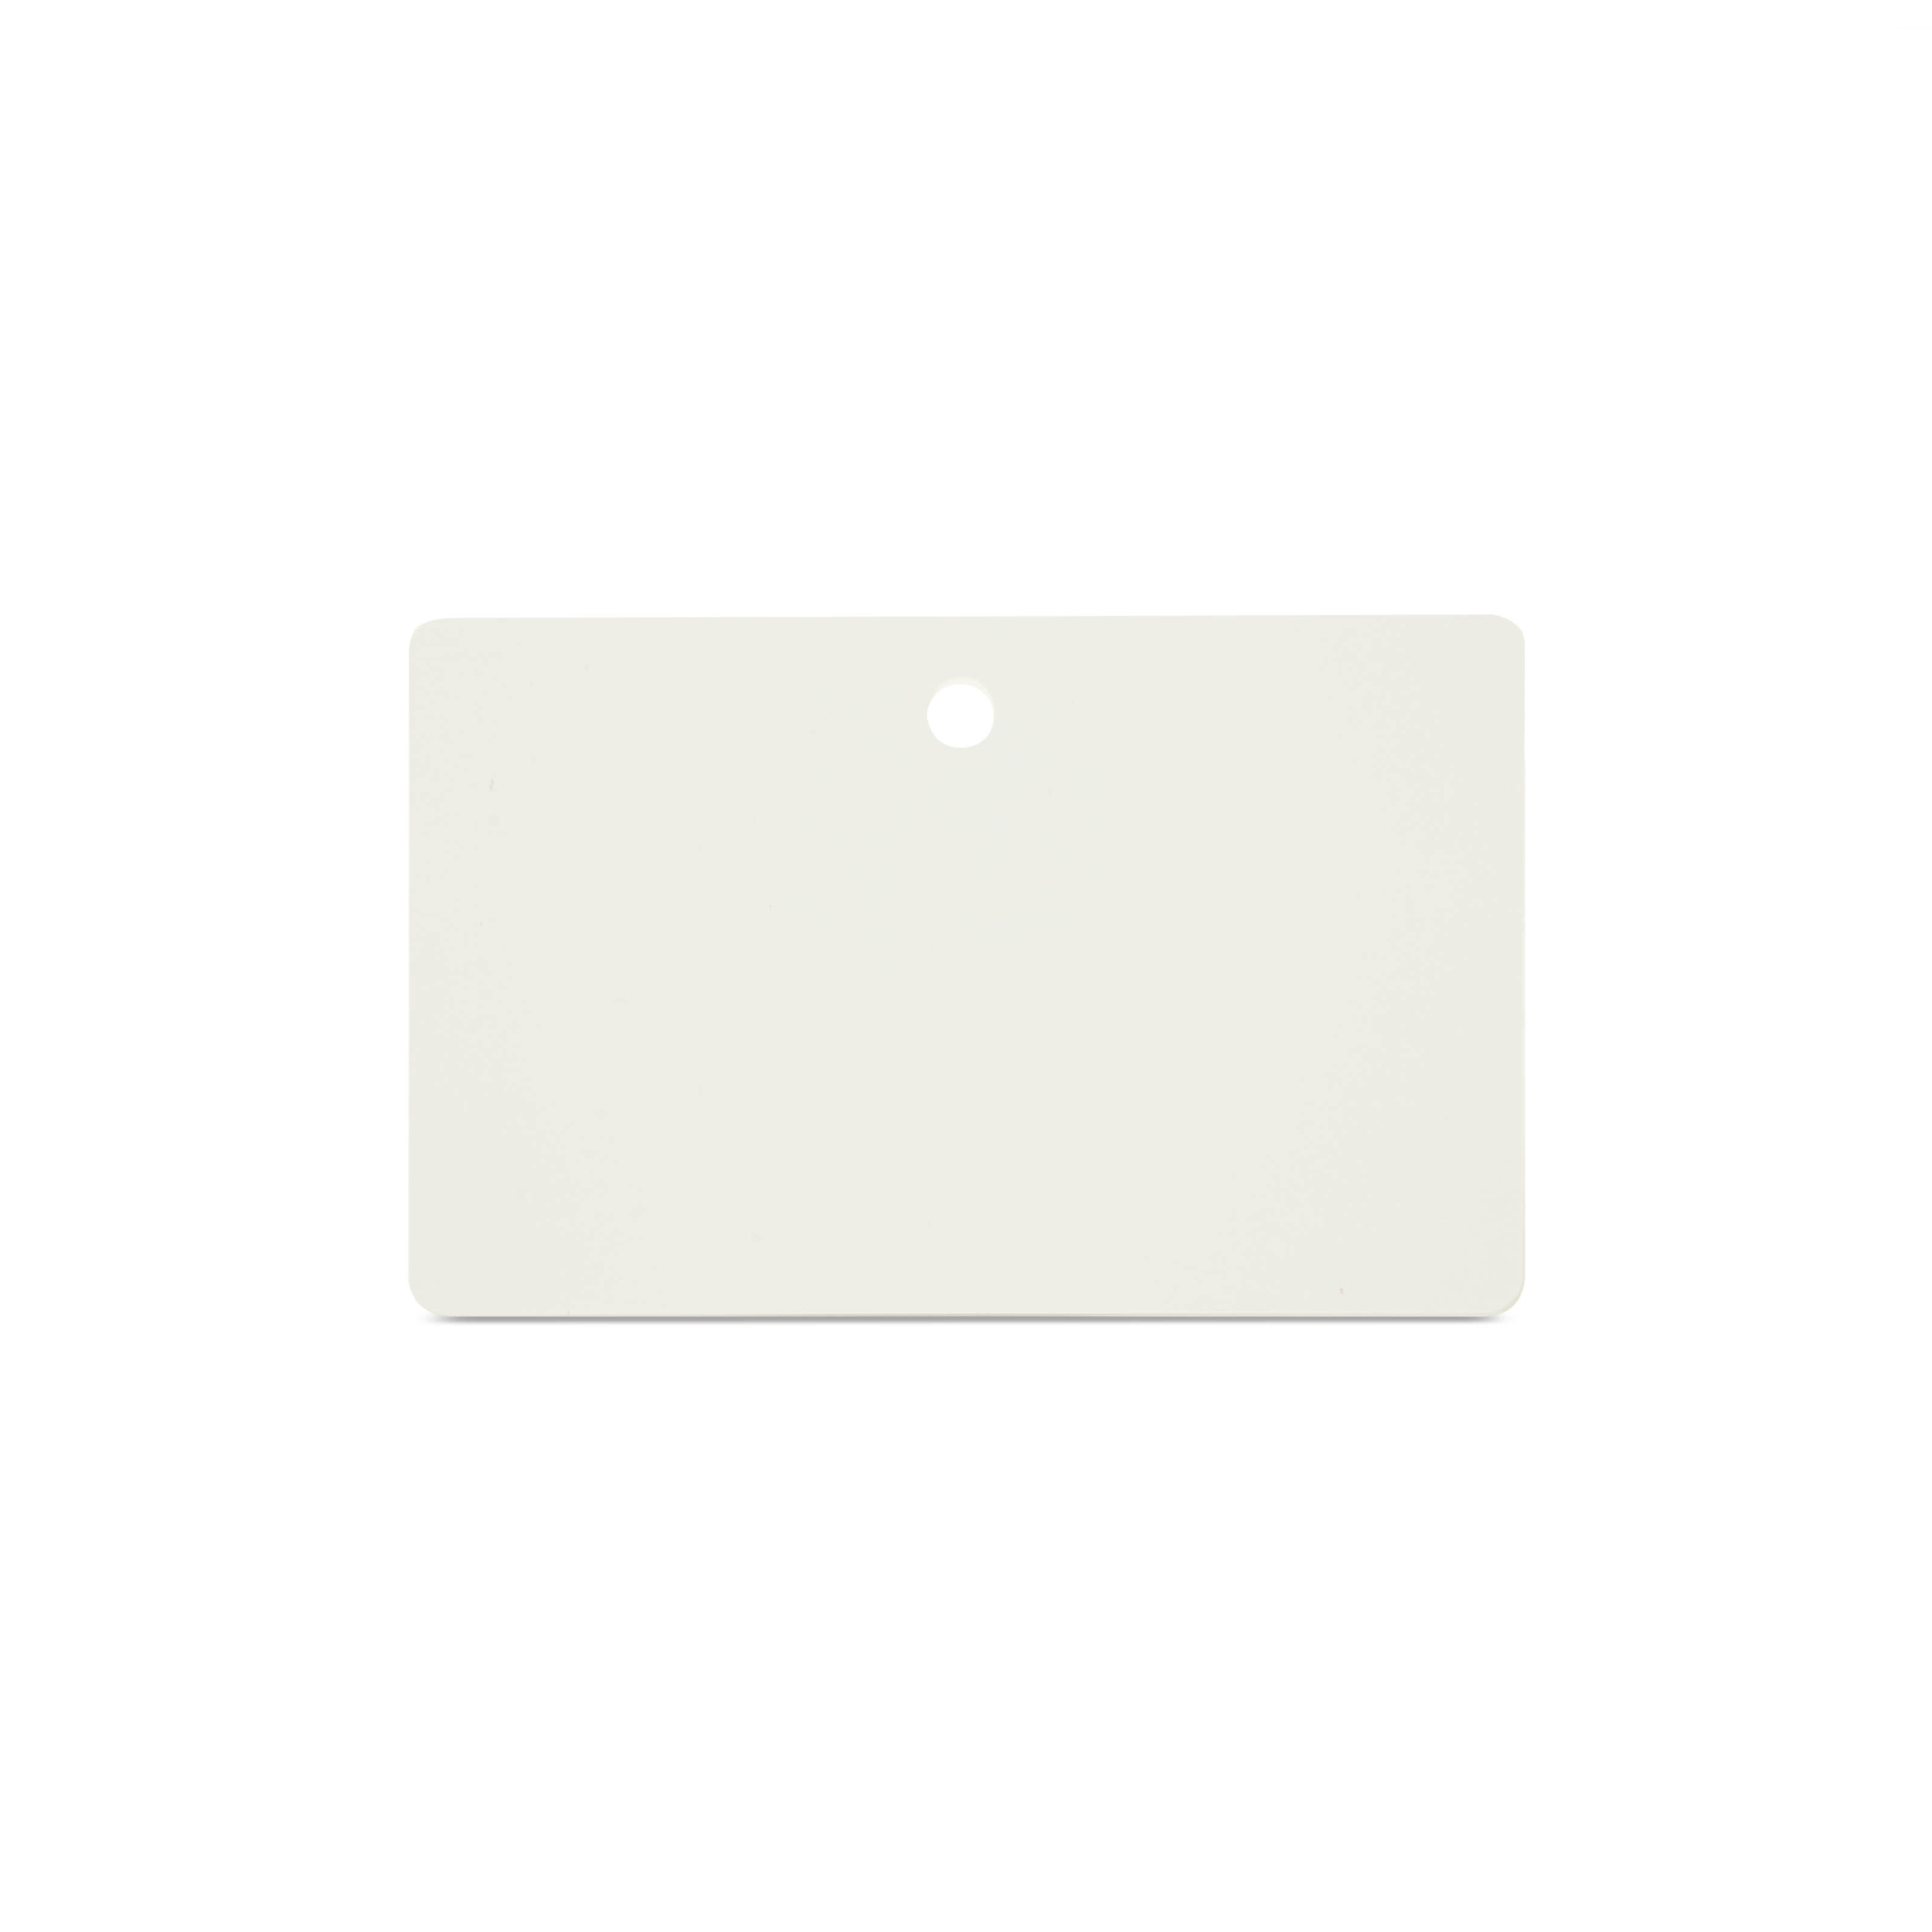 NFC Card PVC - 85,6 x 54 mm - NTAG216 - 924 Byte - white - landscape format perforated